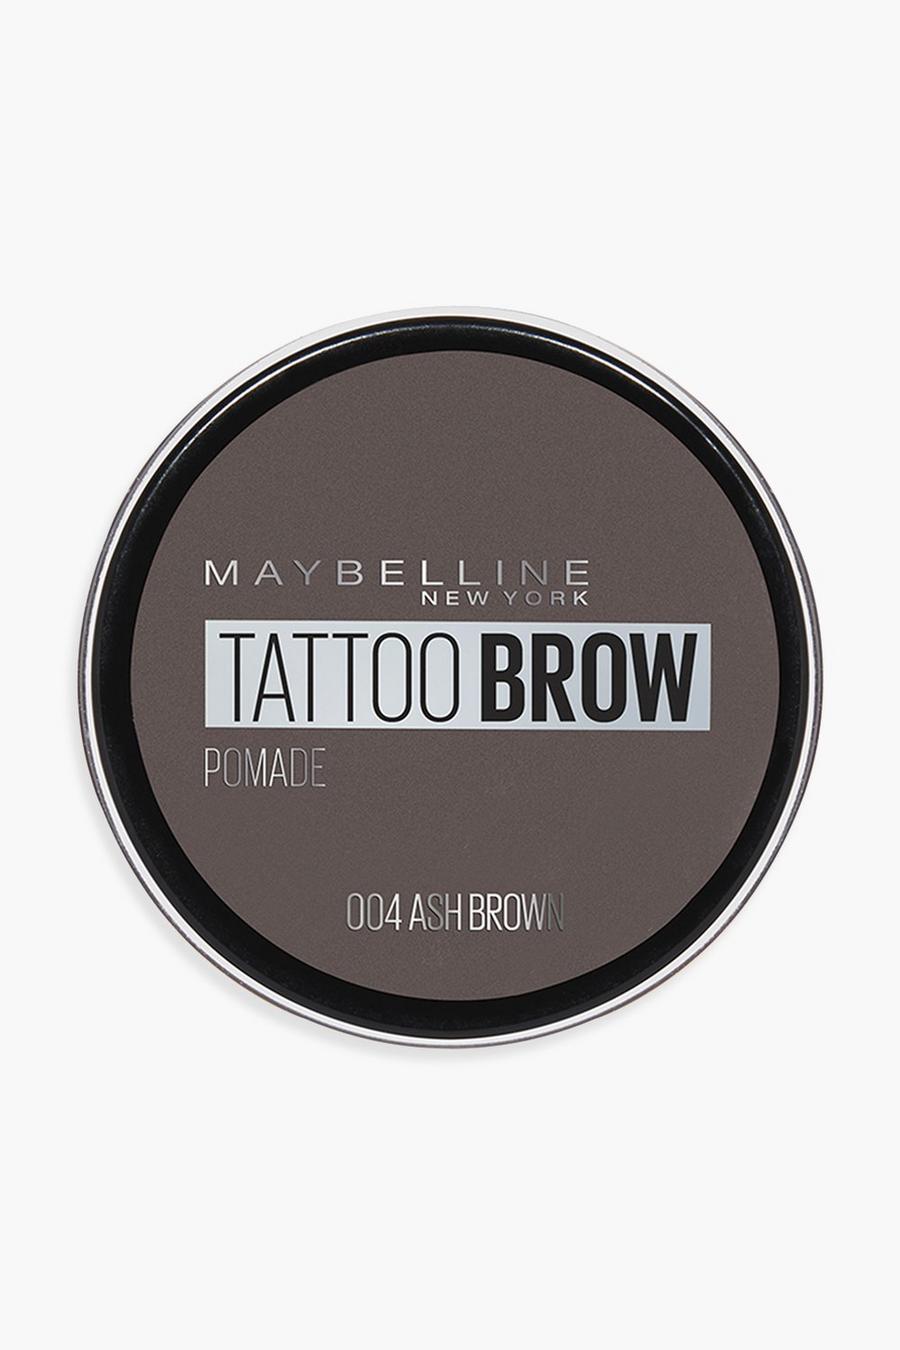 Light brown Maybelline Tattoo Brow Longlasting Pomade Pot - Ash Brown image number 1